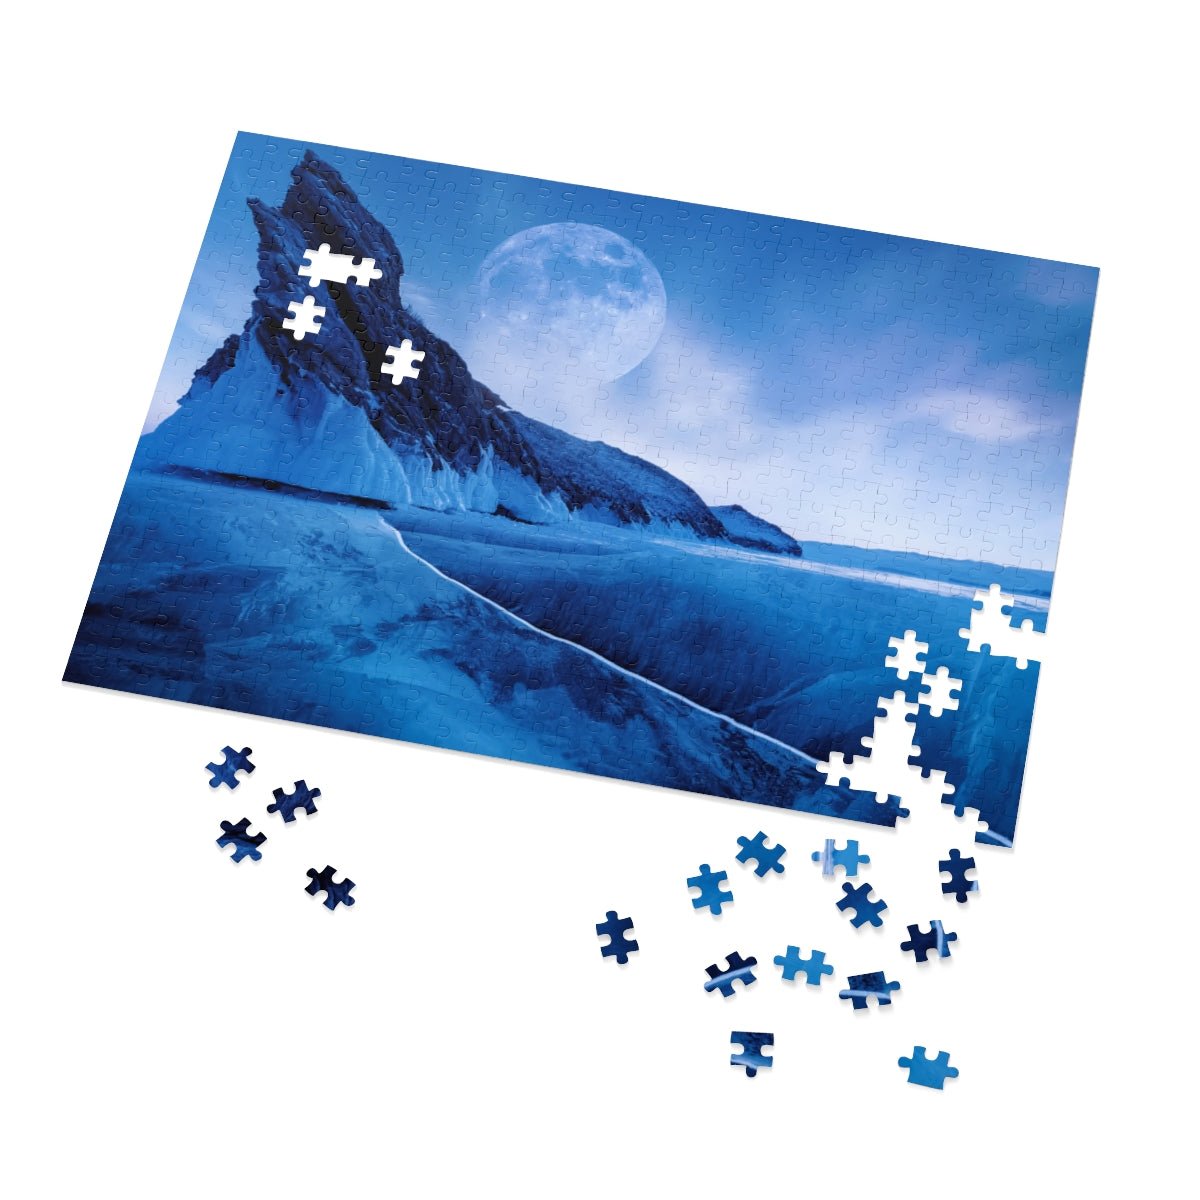 Winter Siberian Landscape Jigsaw Puzzle - Puffin Lime